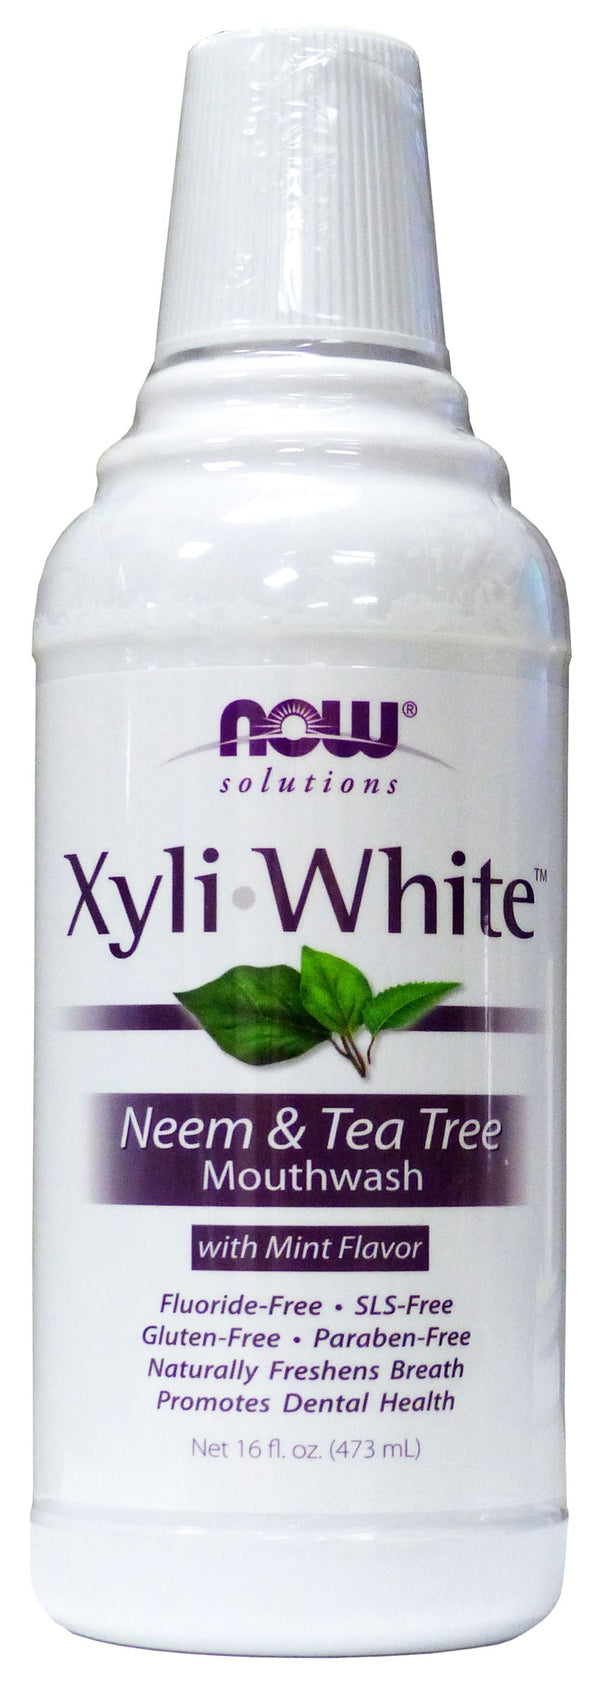 NOW XyliWhite Neem & Tea Tree Mouthwash 16 fl oz. - High-quality Beauty and Personal Care by NOW at 